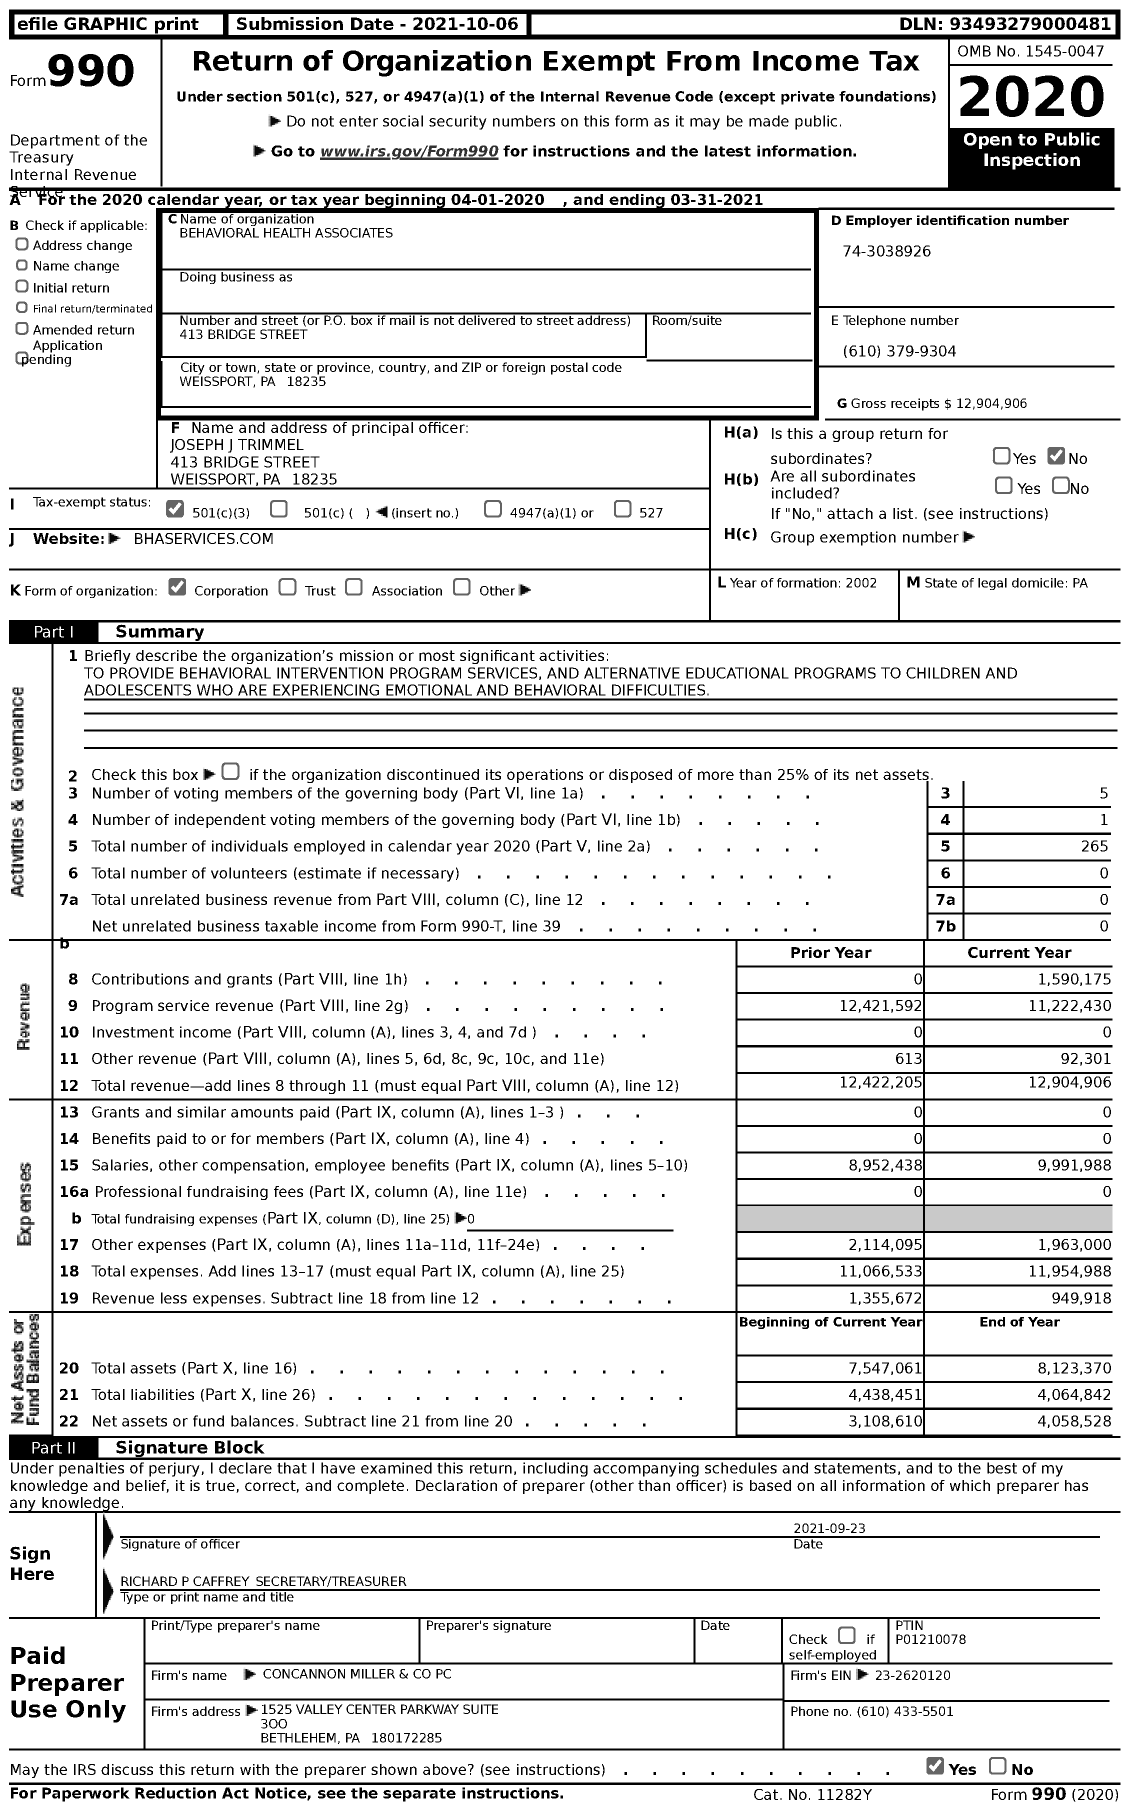 Image of first page of 2020 Form 990 for Behavioral Health Associates (BHA)